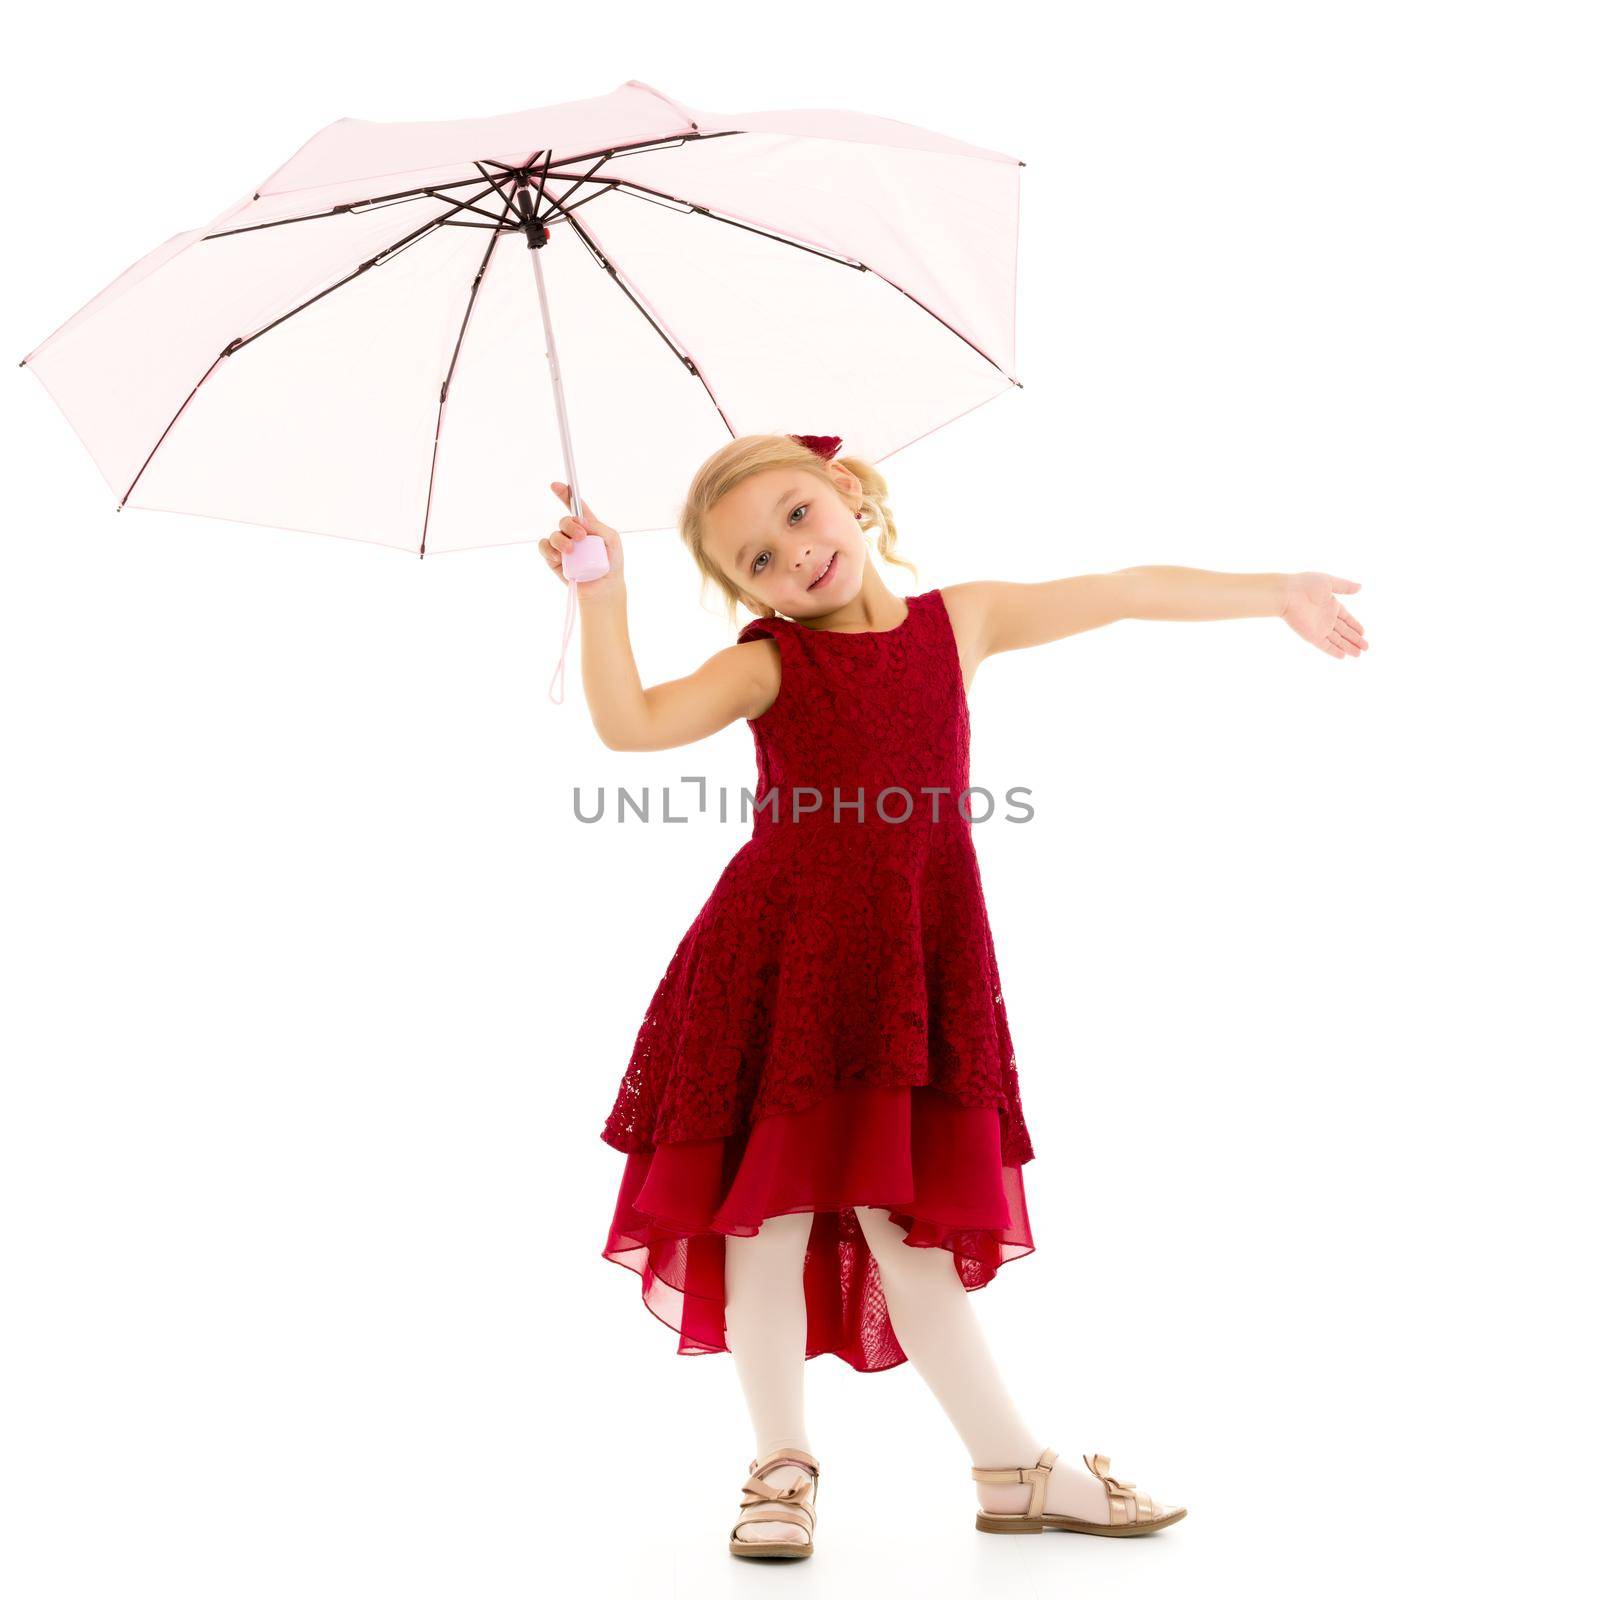 Little girl under an umbrella.Concept style and fashion. Isolated on white background. by kolesnikov_studio